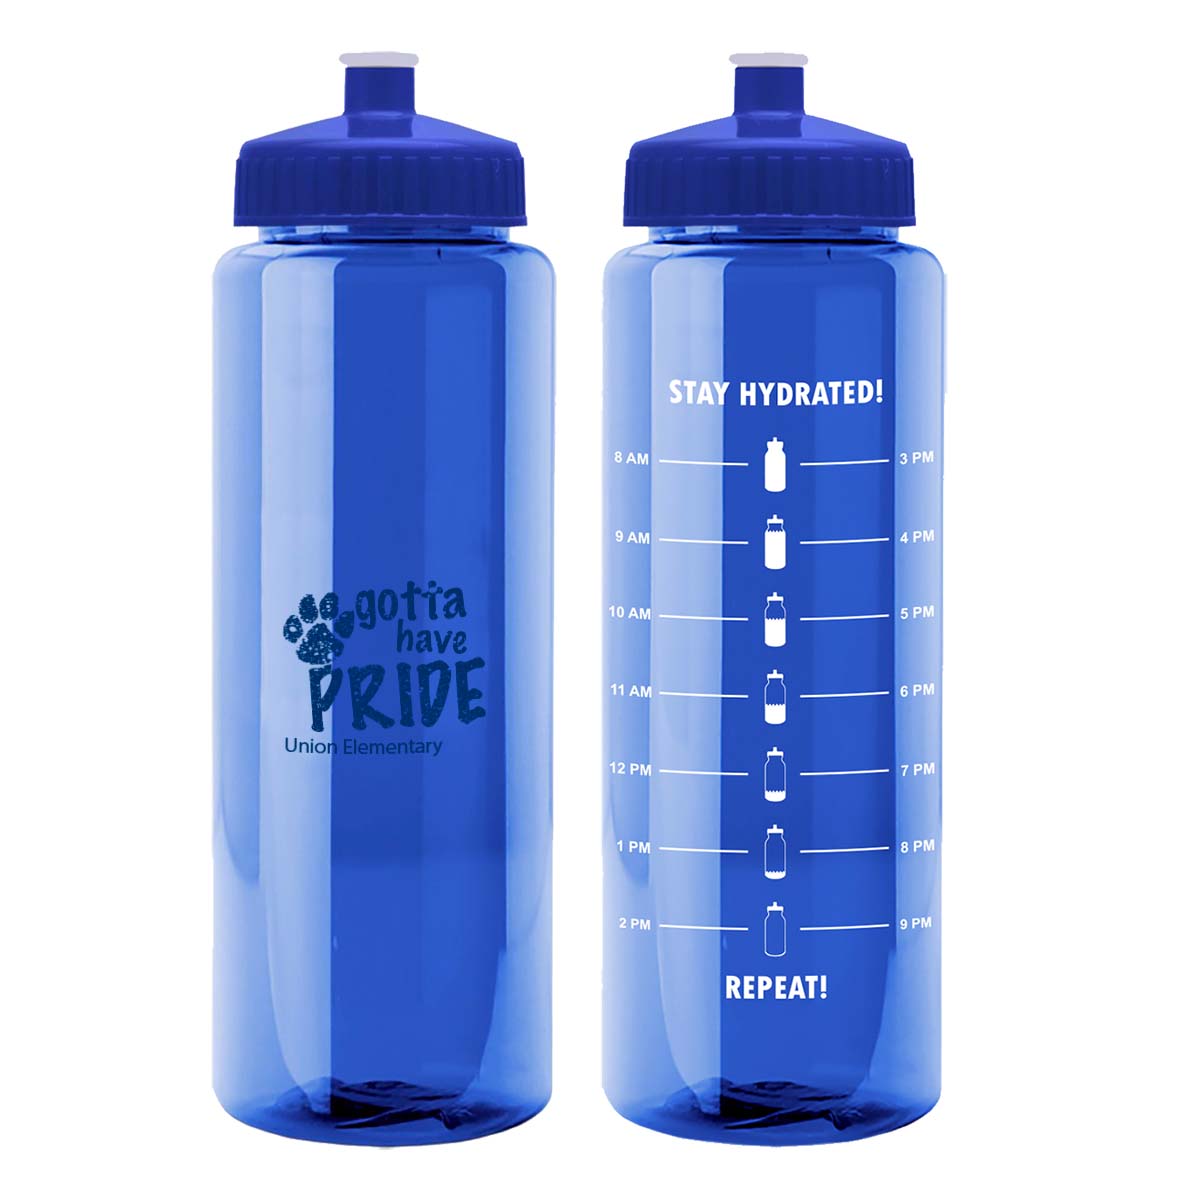 https://www.itselementary.com/-/media/Products/ie/student-awards/drinkware/water-bottles/eltb323-water-measurement-bottle-stay-hydrated-000.ashx